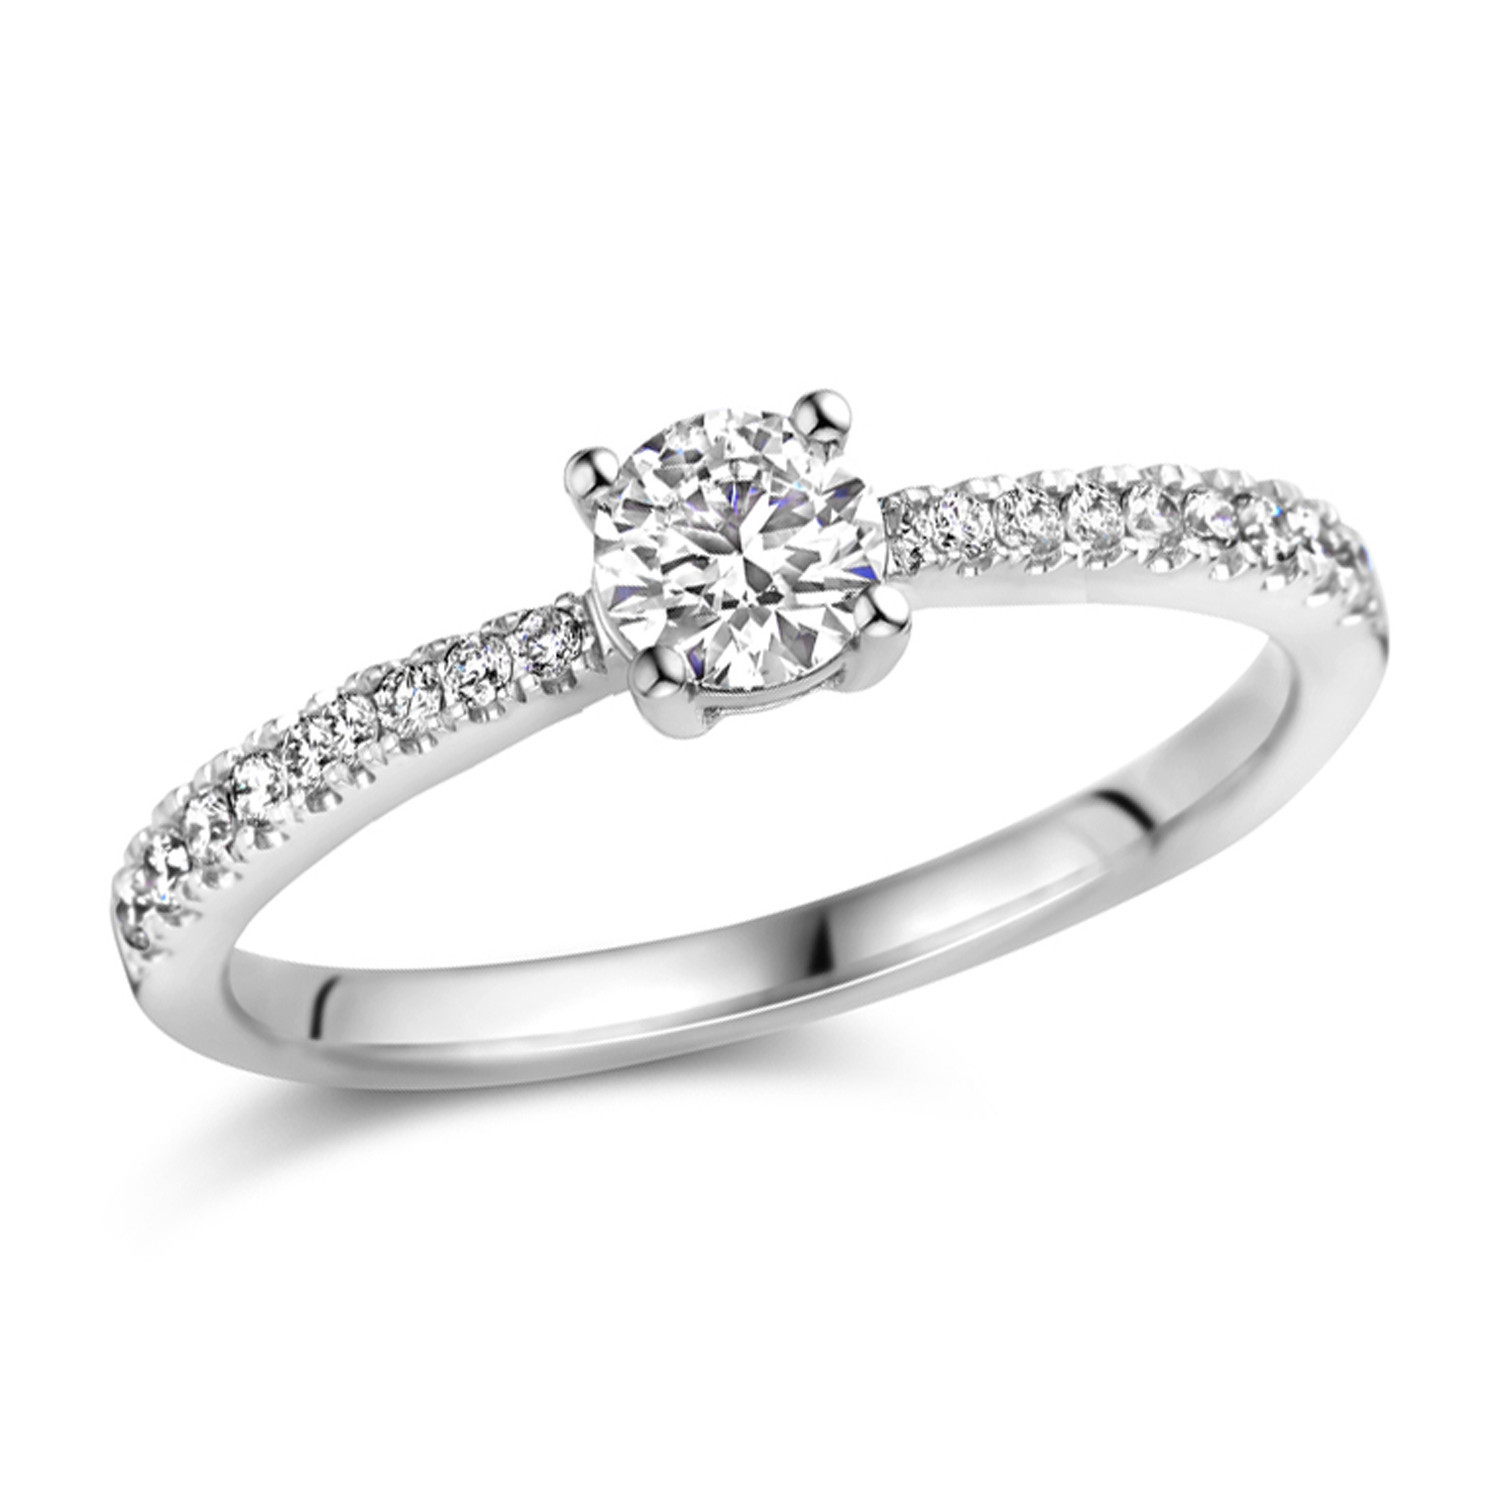 Solitaire accompagné or blanc 18 carats